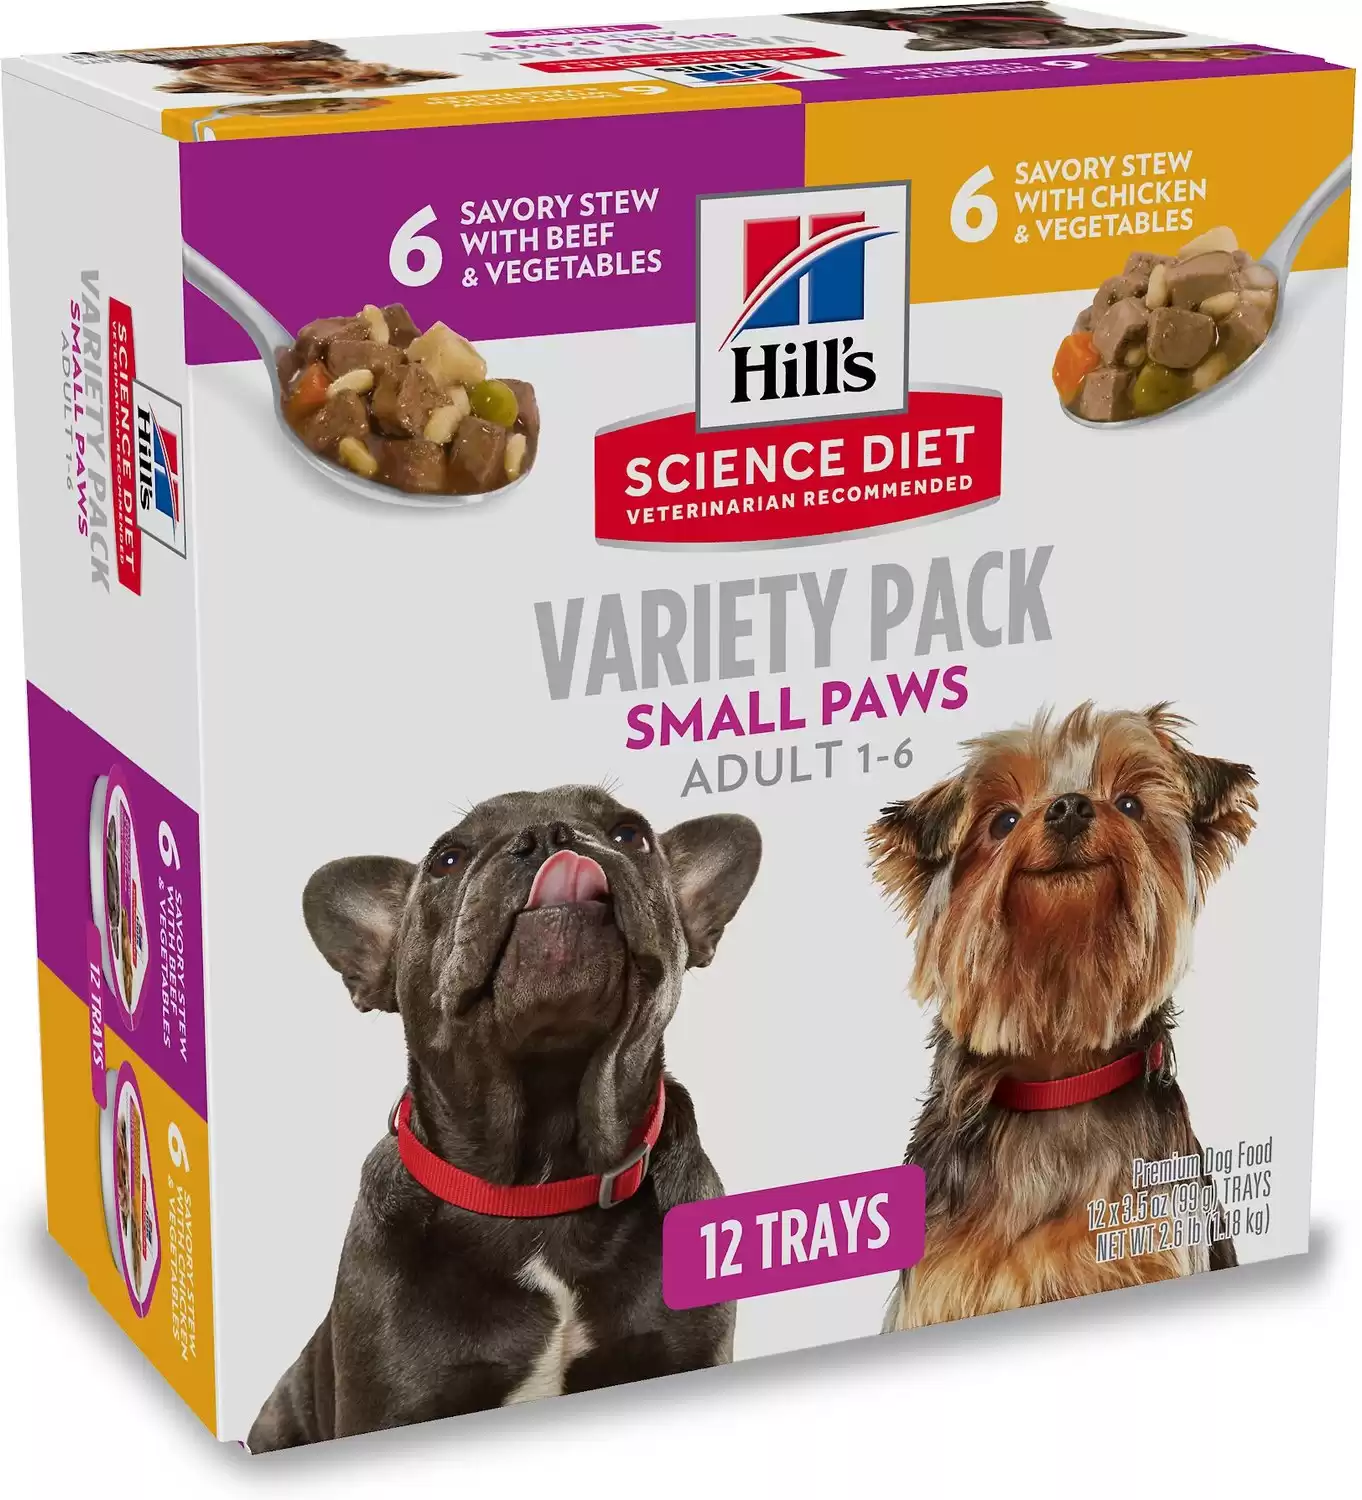 Hill's Science Diet Adult Small Paws Variety Pack Wet Dog Food Trays